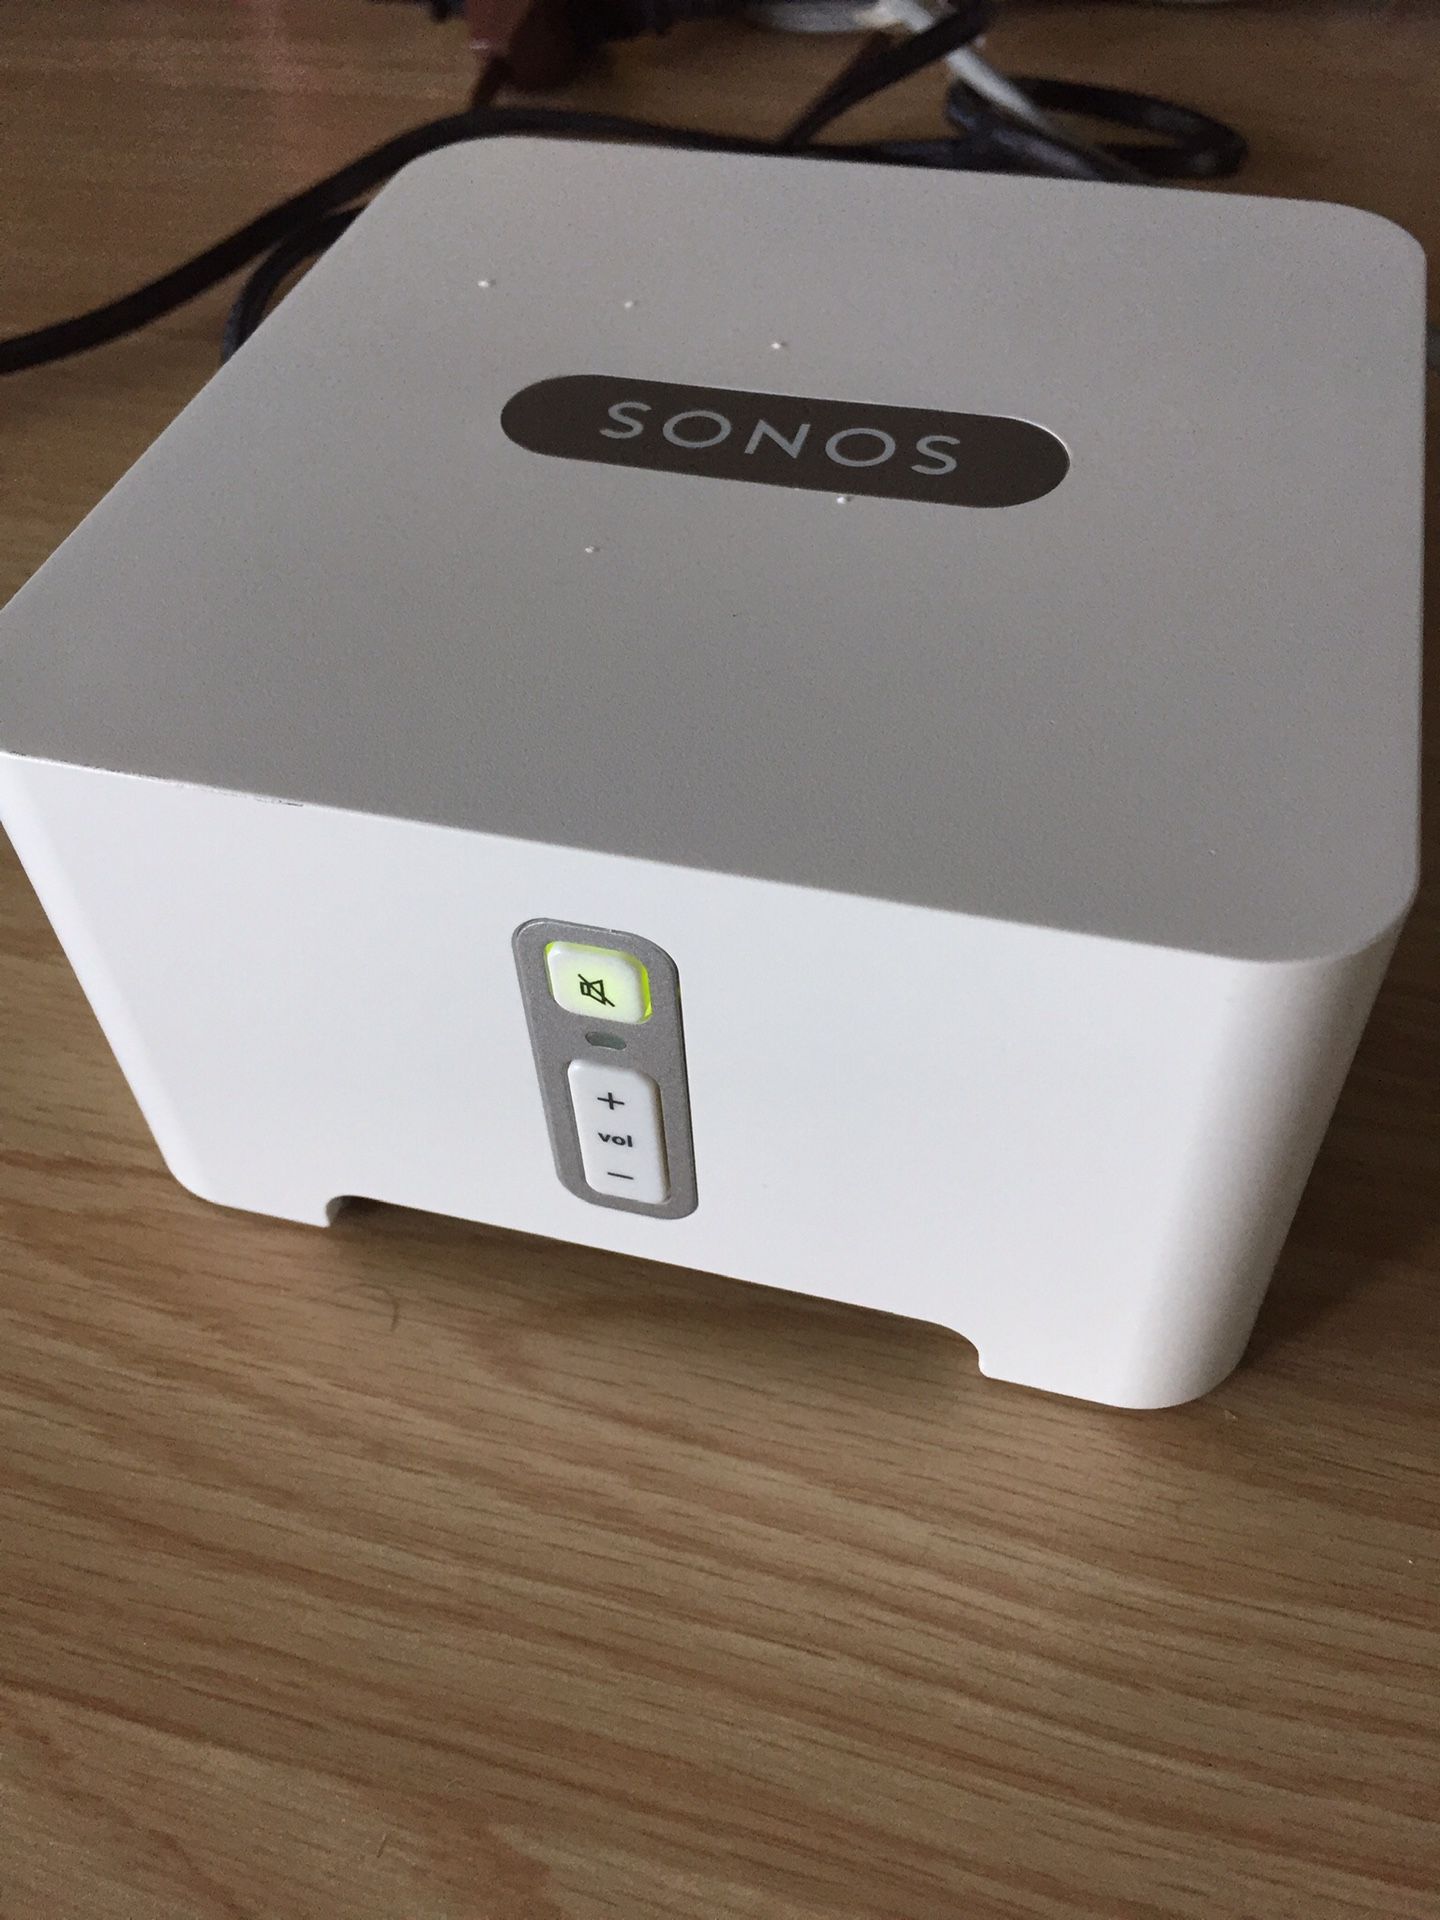 Sonos connect media streaming audio sound device